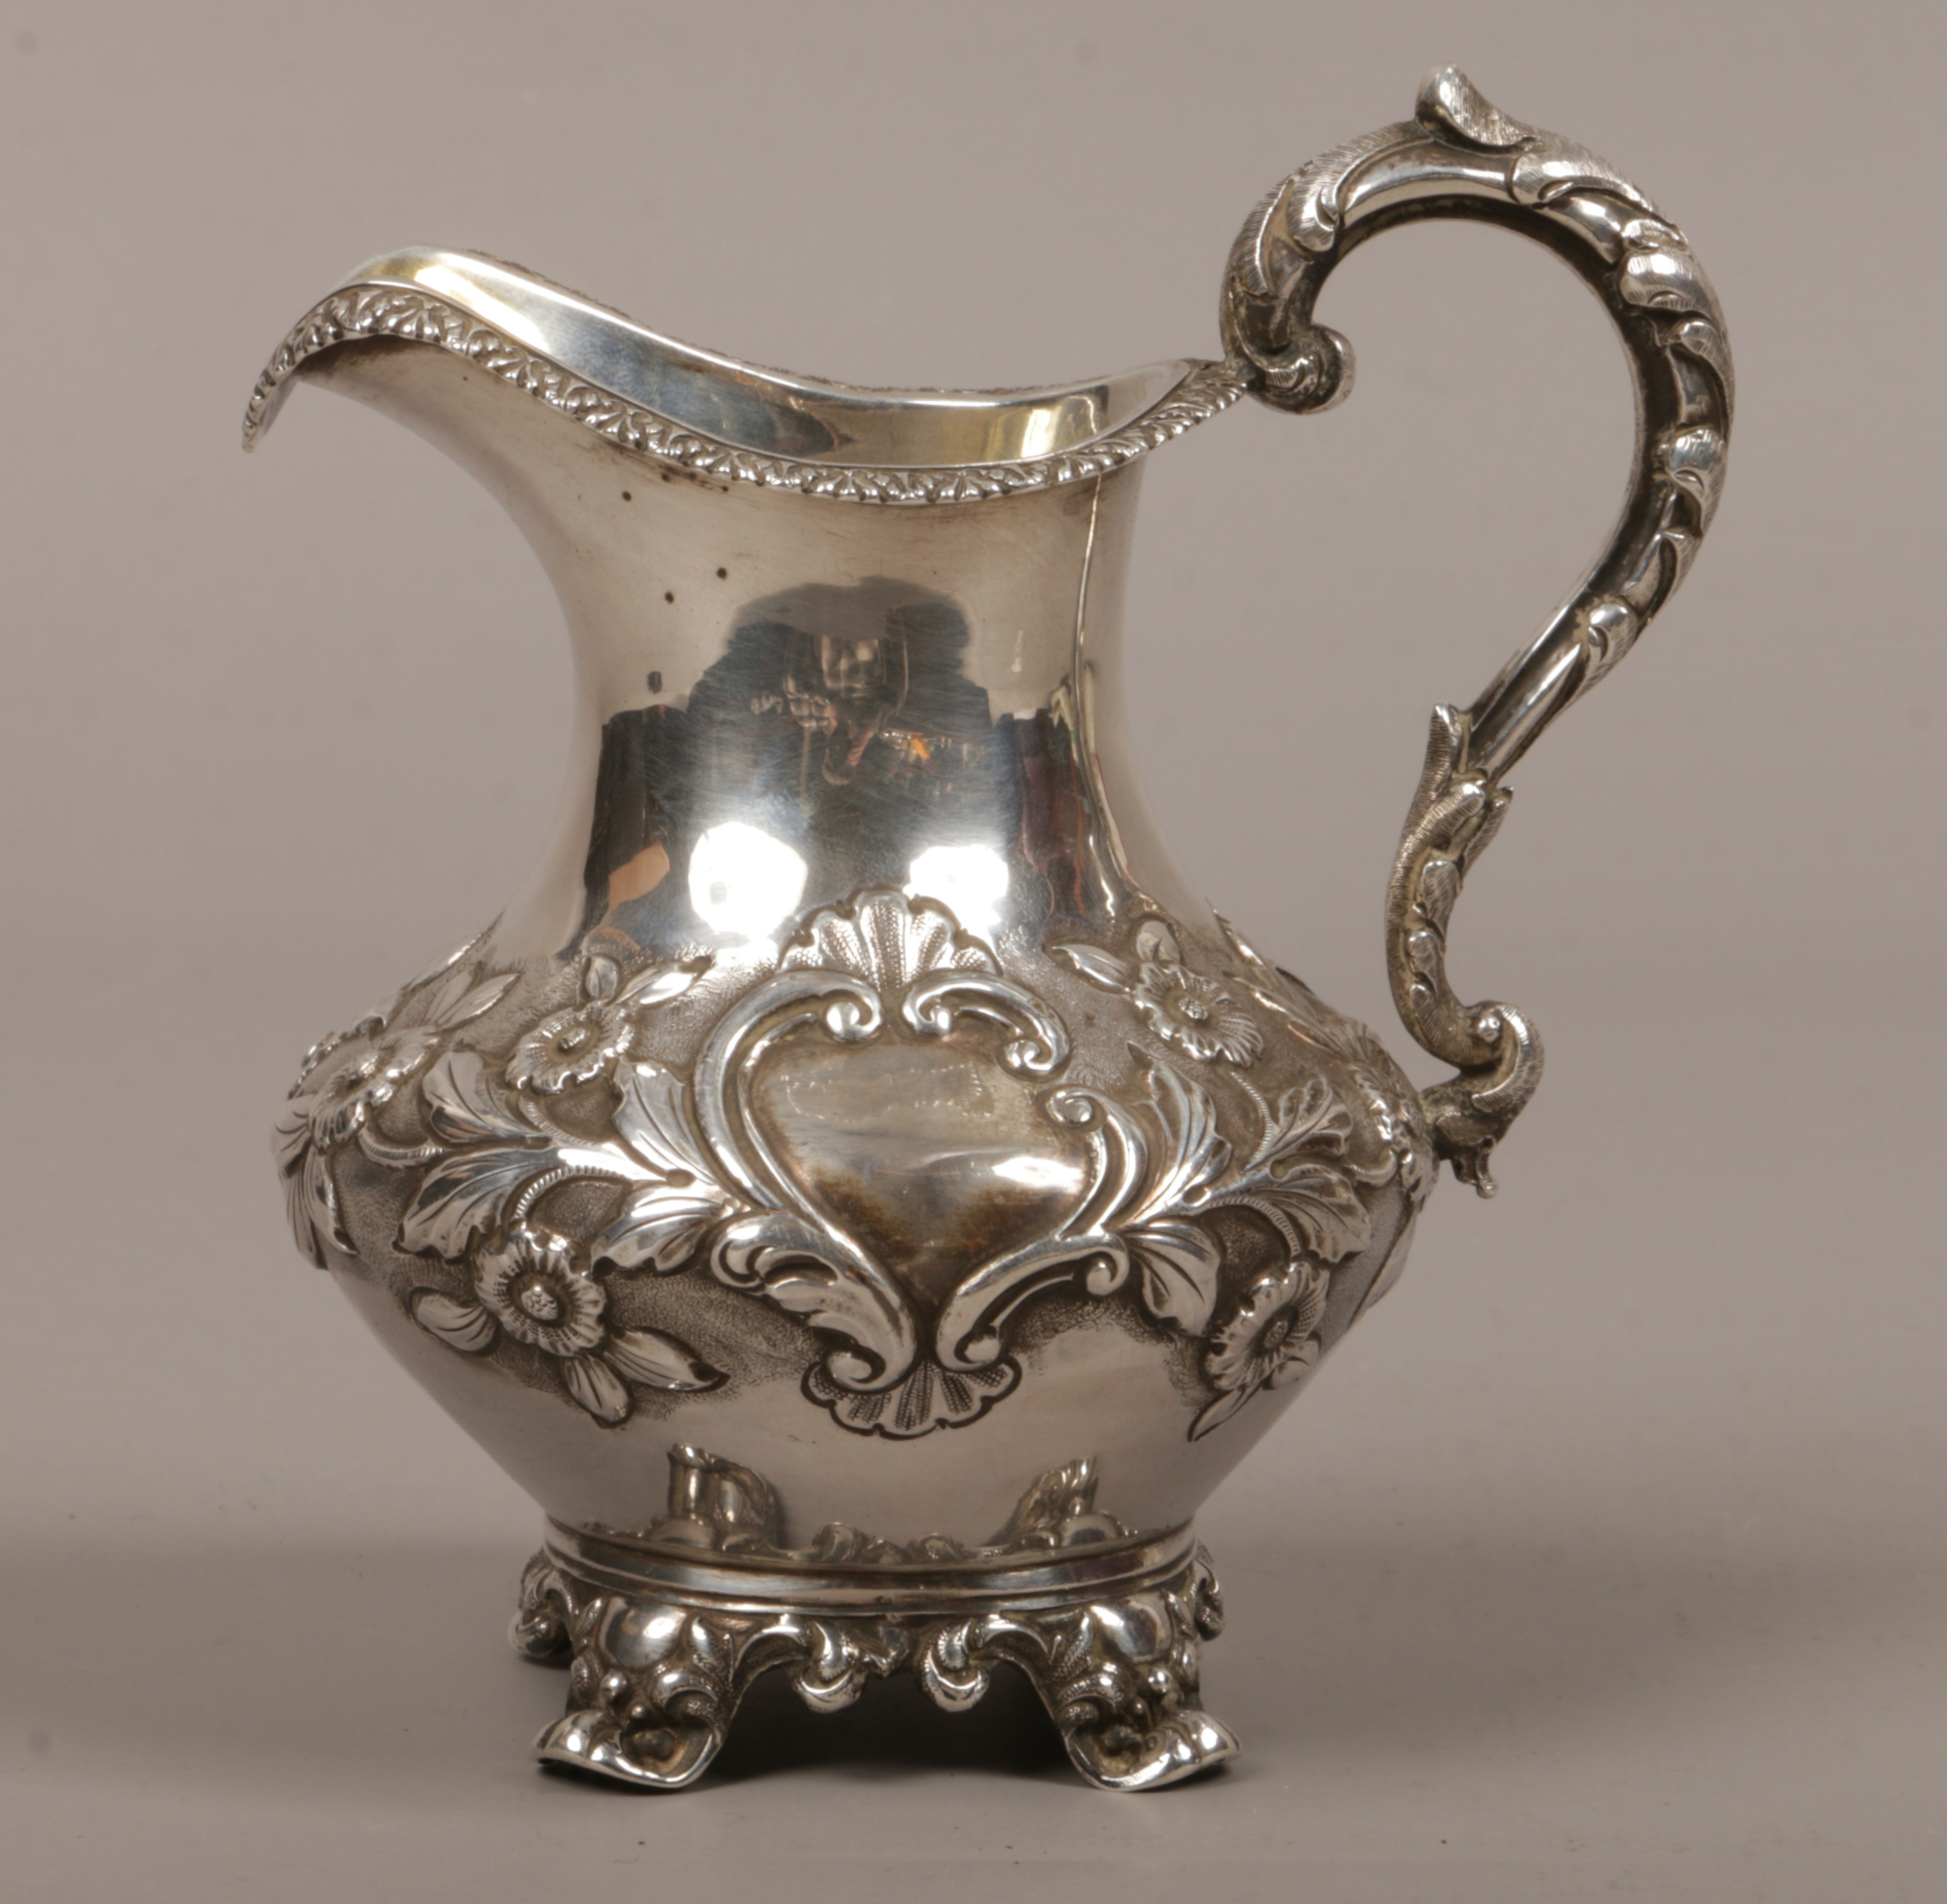 A Victorian silver cream jug with gilt lining assayed London 1842 by William Hunter, 164 grams.